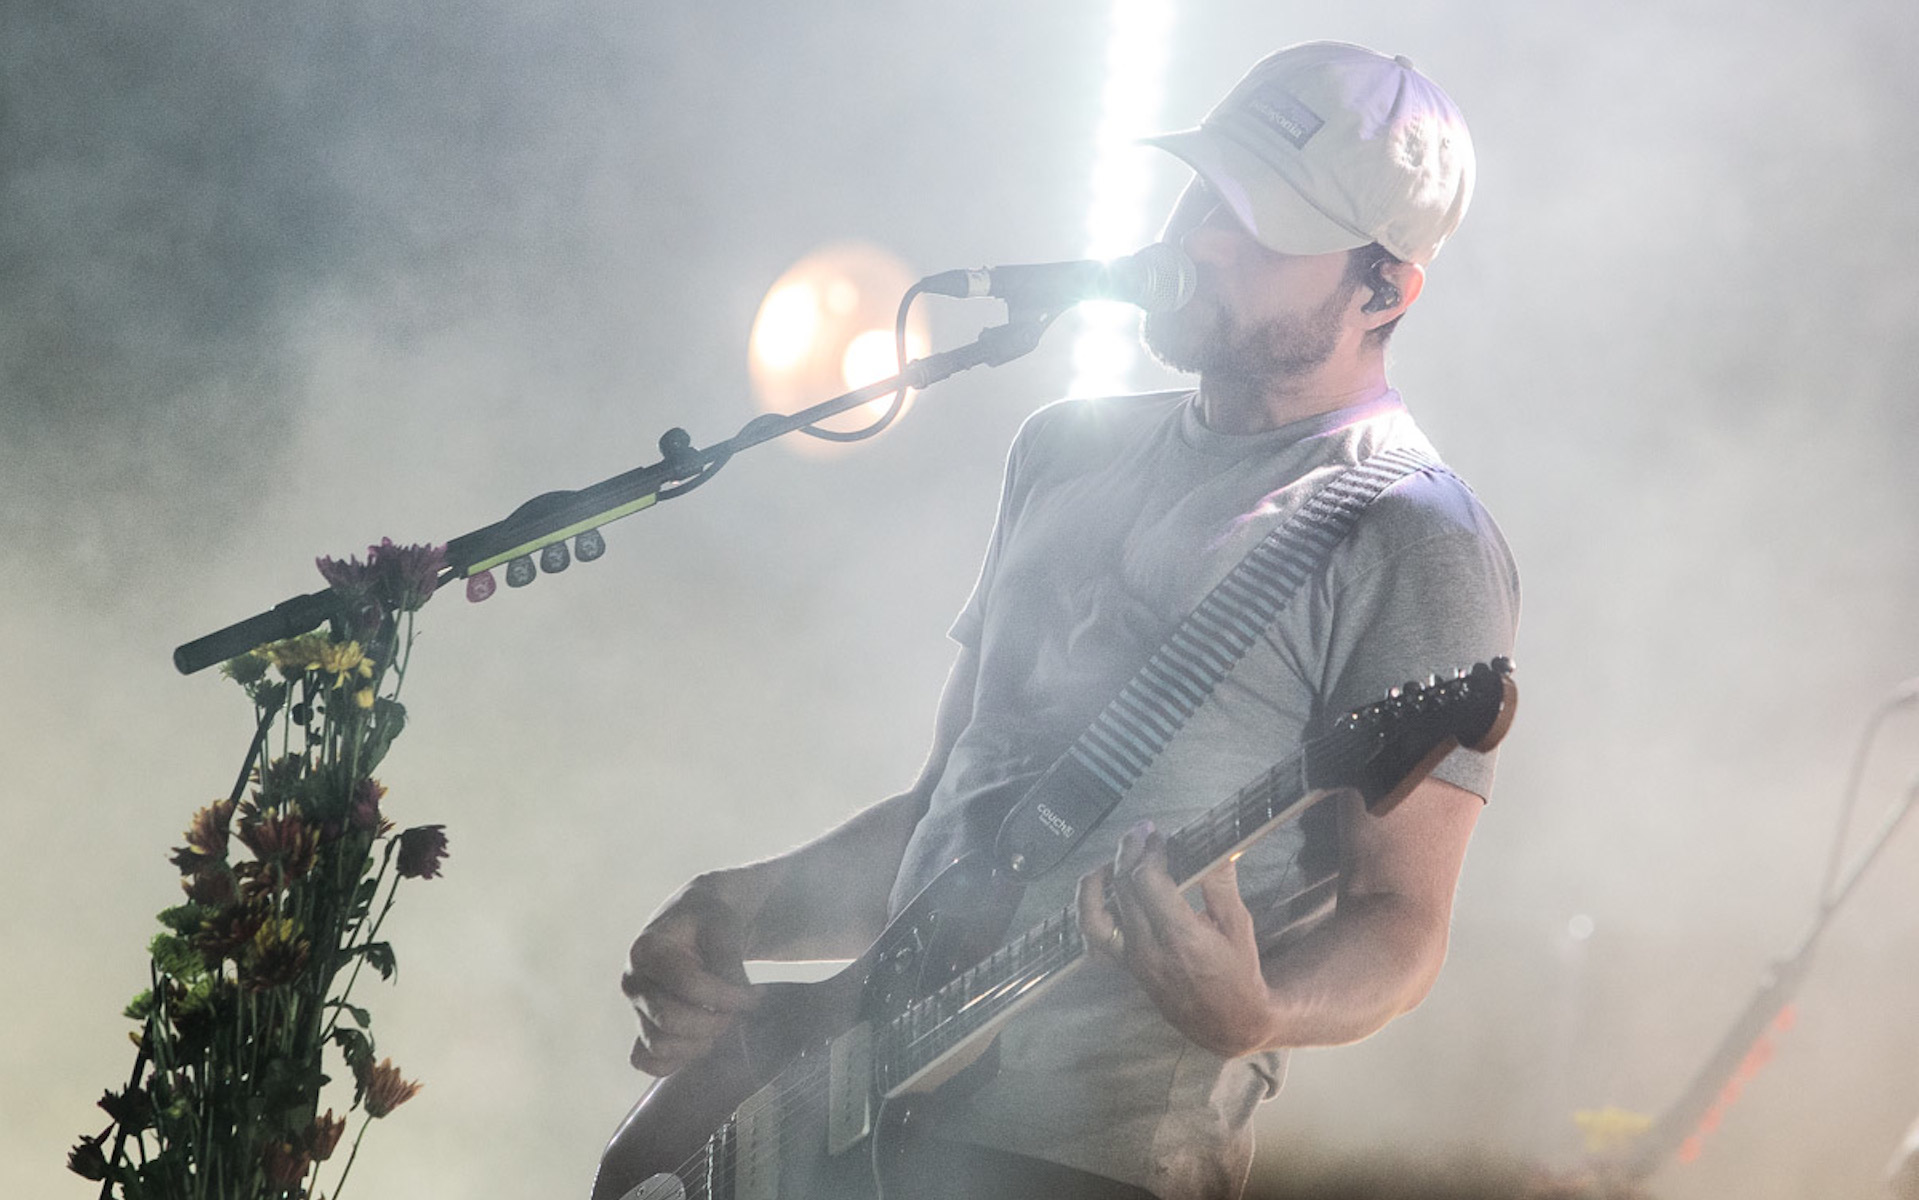 Live Review + Photo Gallery: Brand New remain full of surprises at